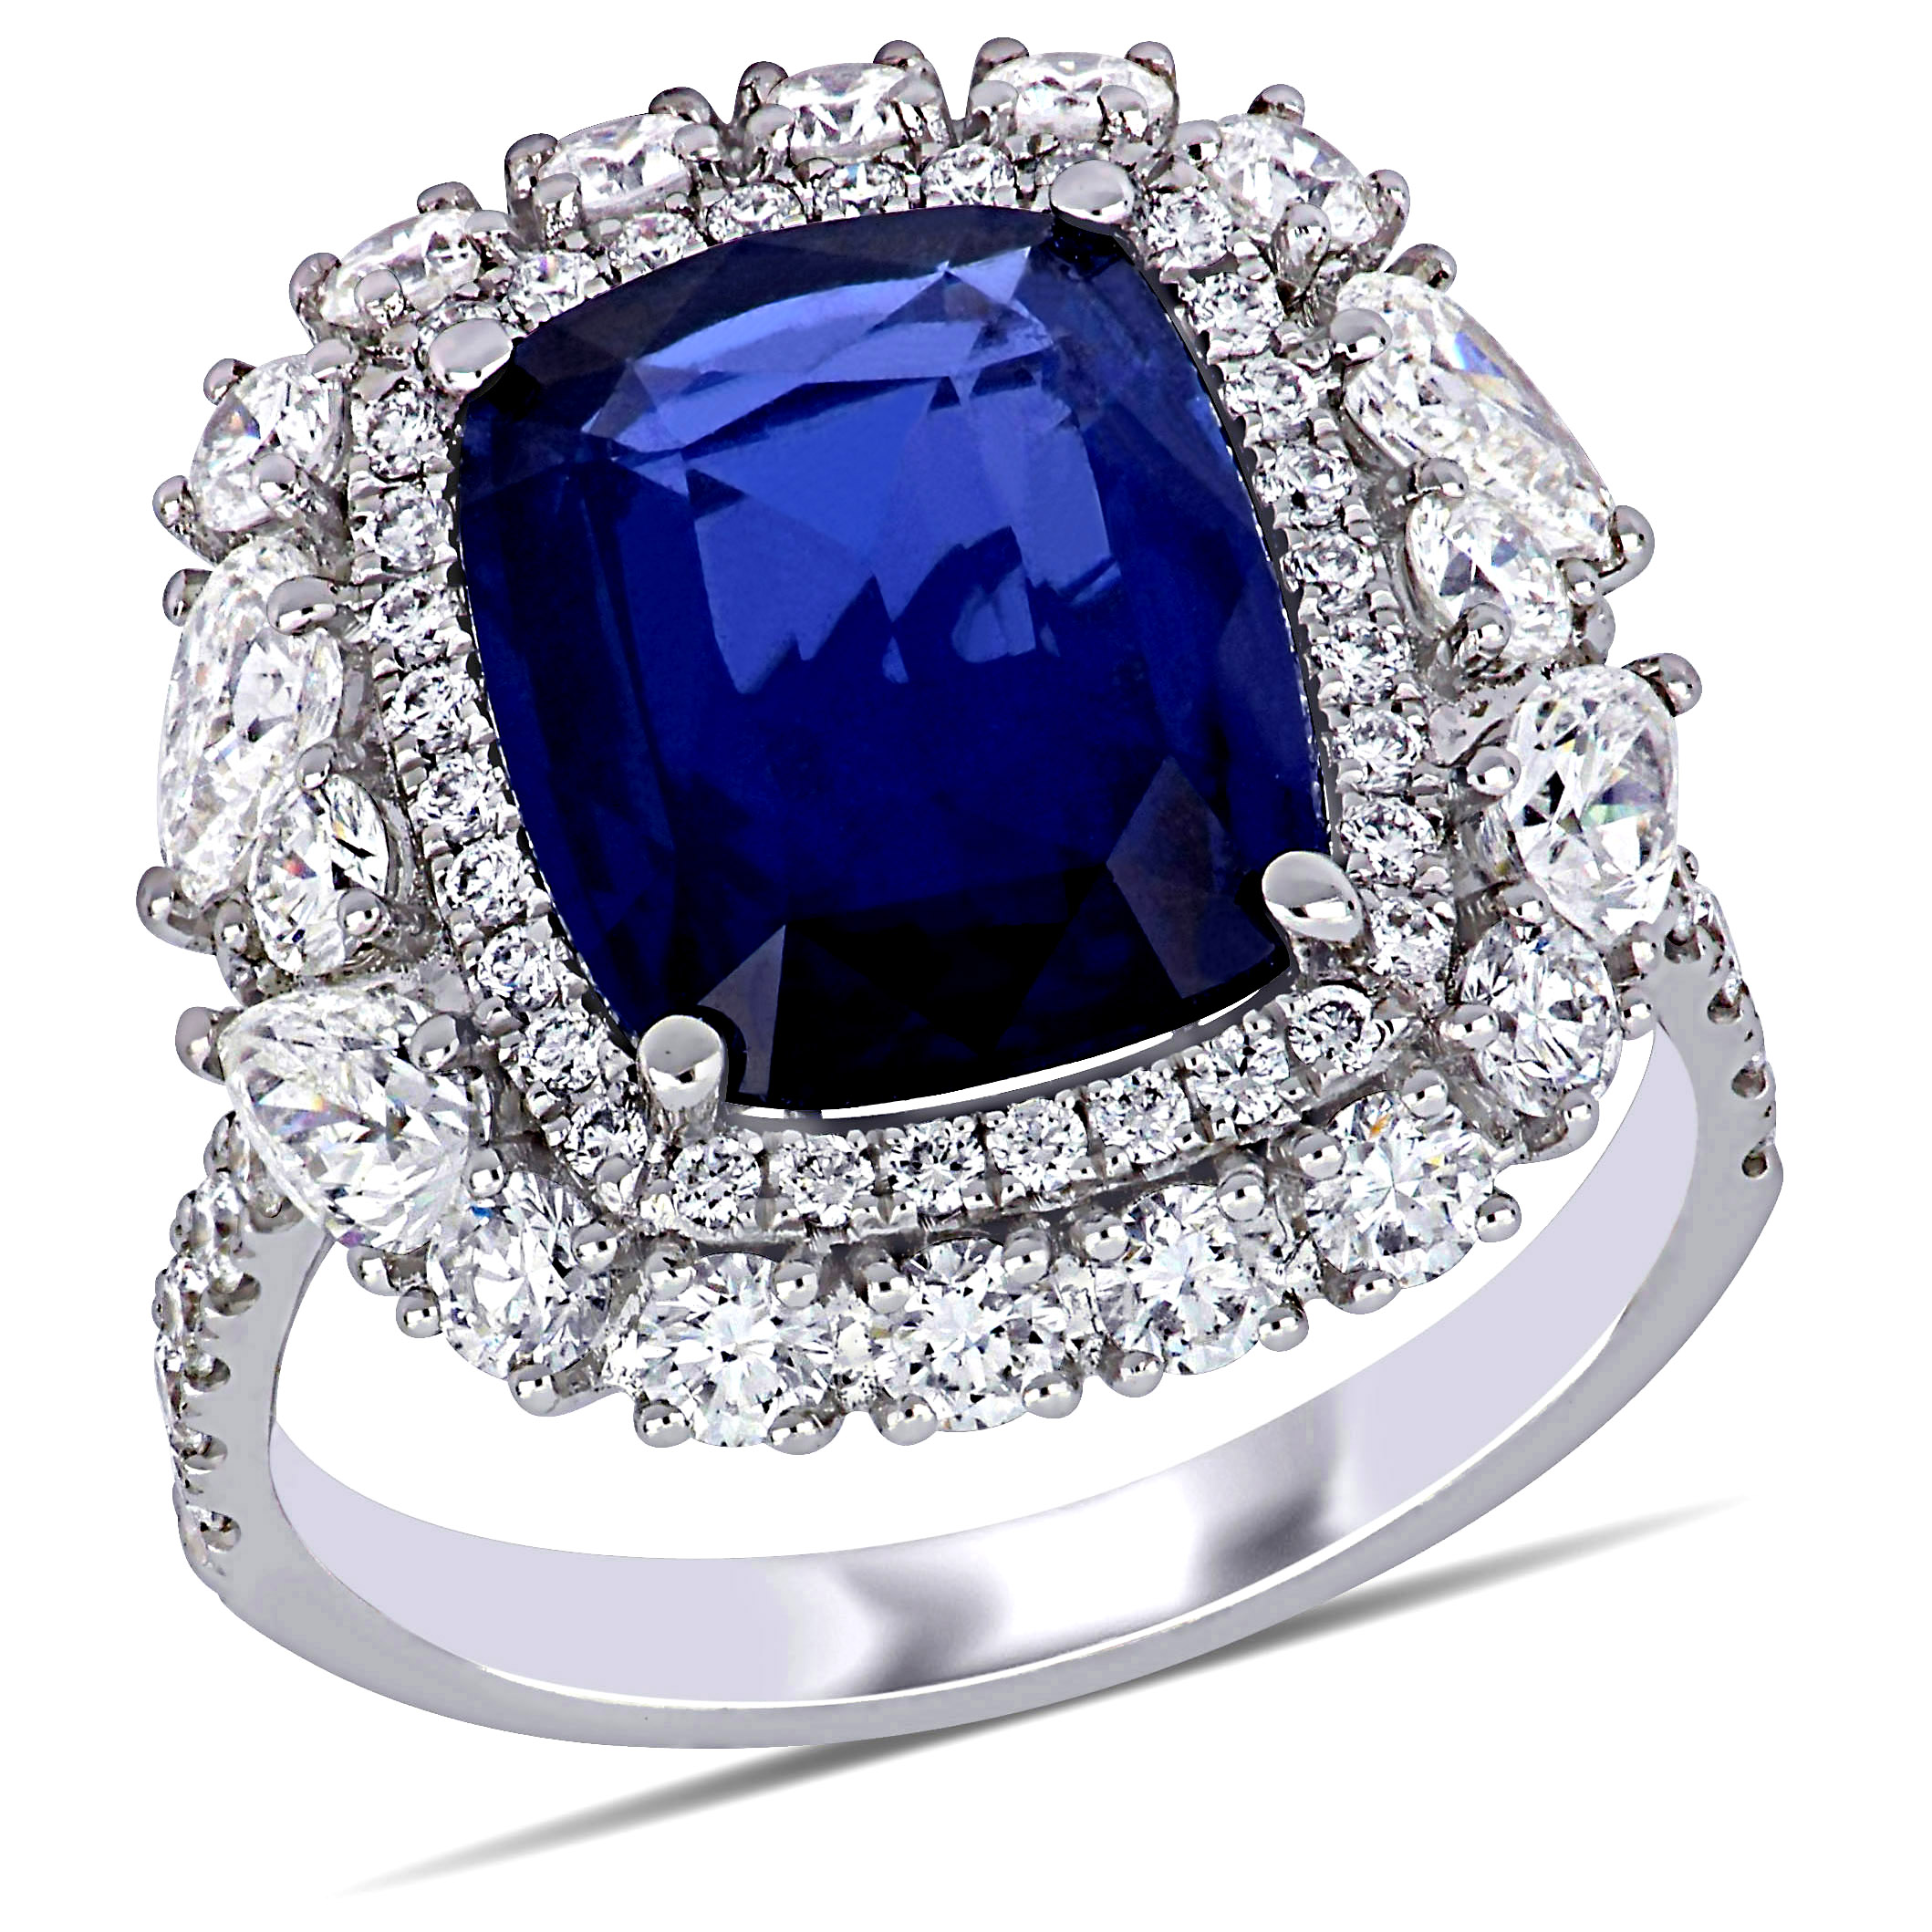 6 1/8 CT TGW Blue Sapphire and 2 CT TW Diamonds Halo Cocktail Ring in 14k White Gold